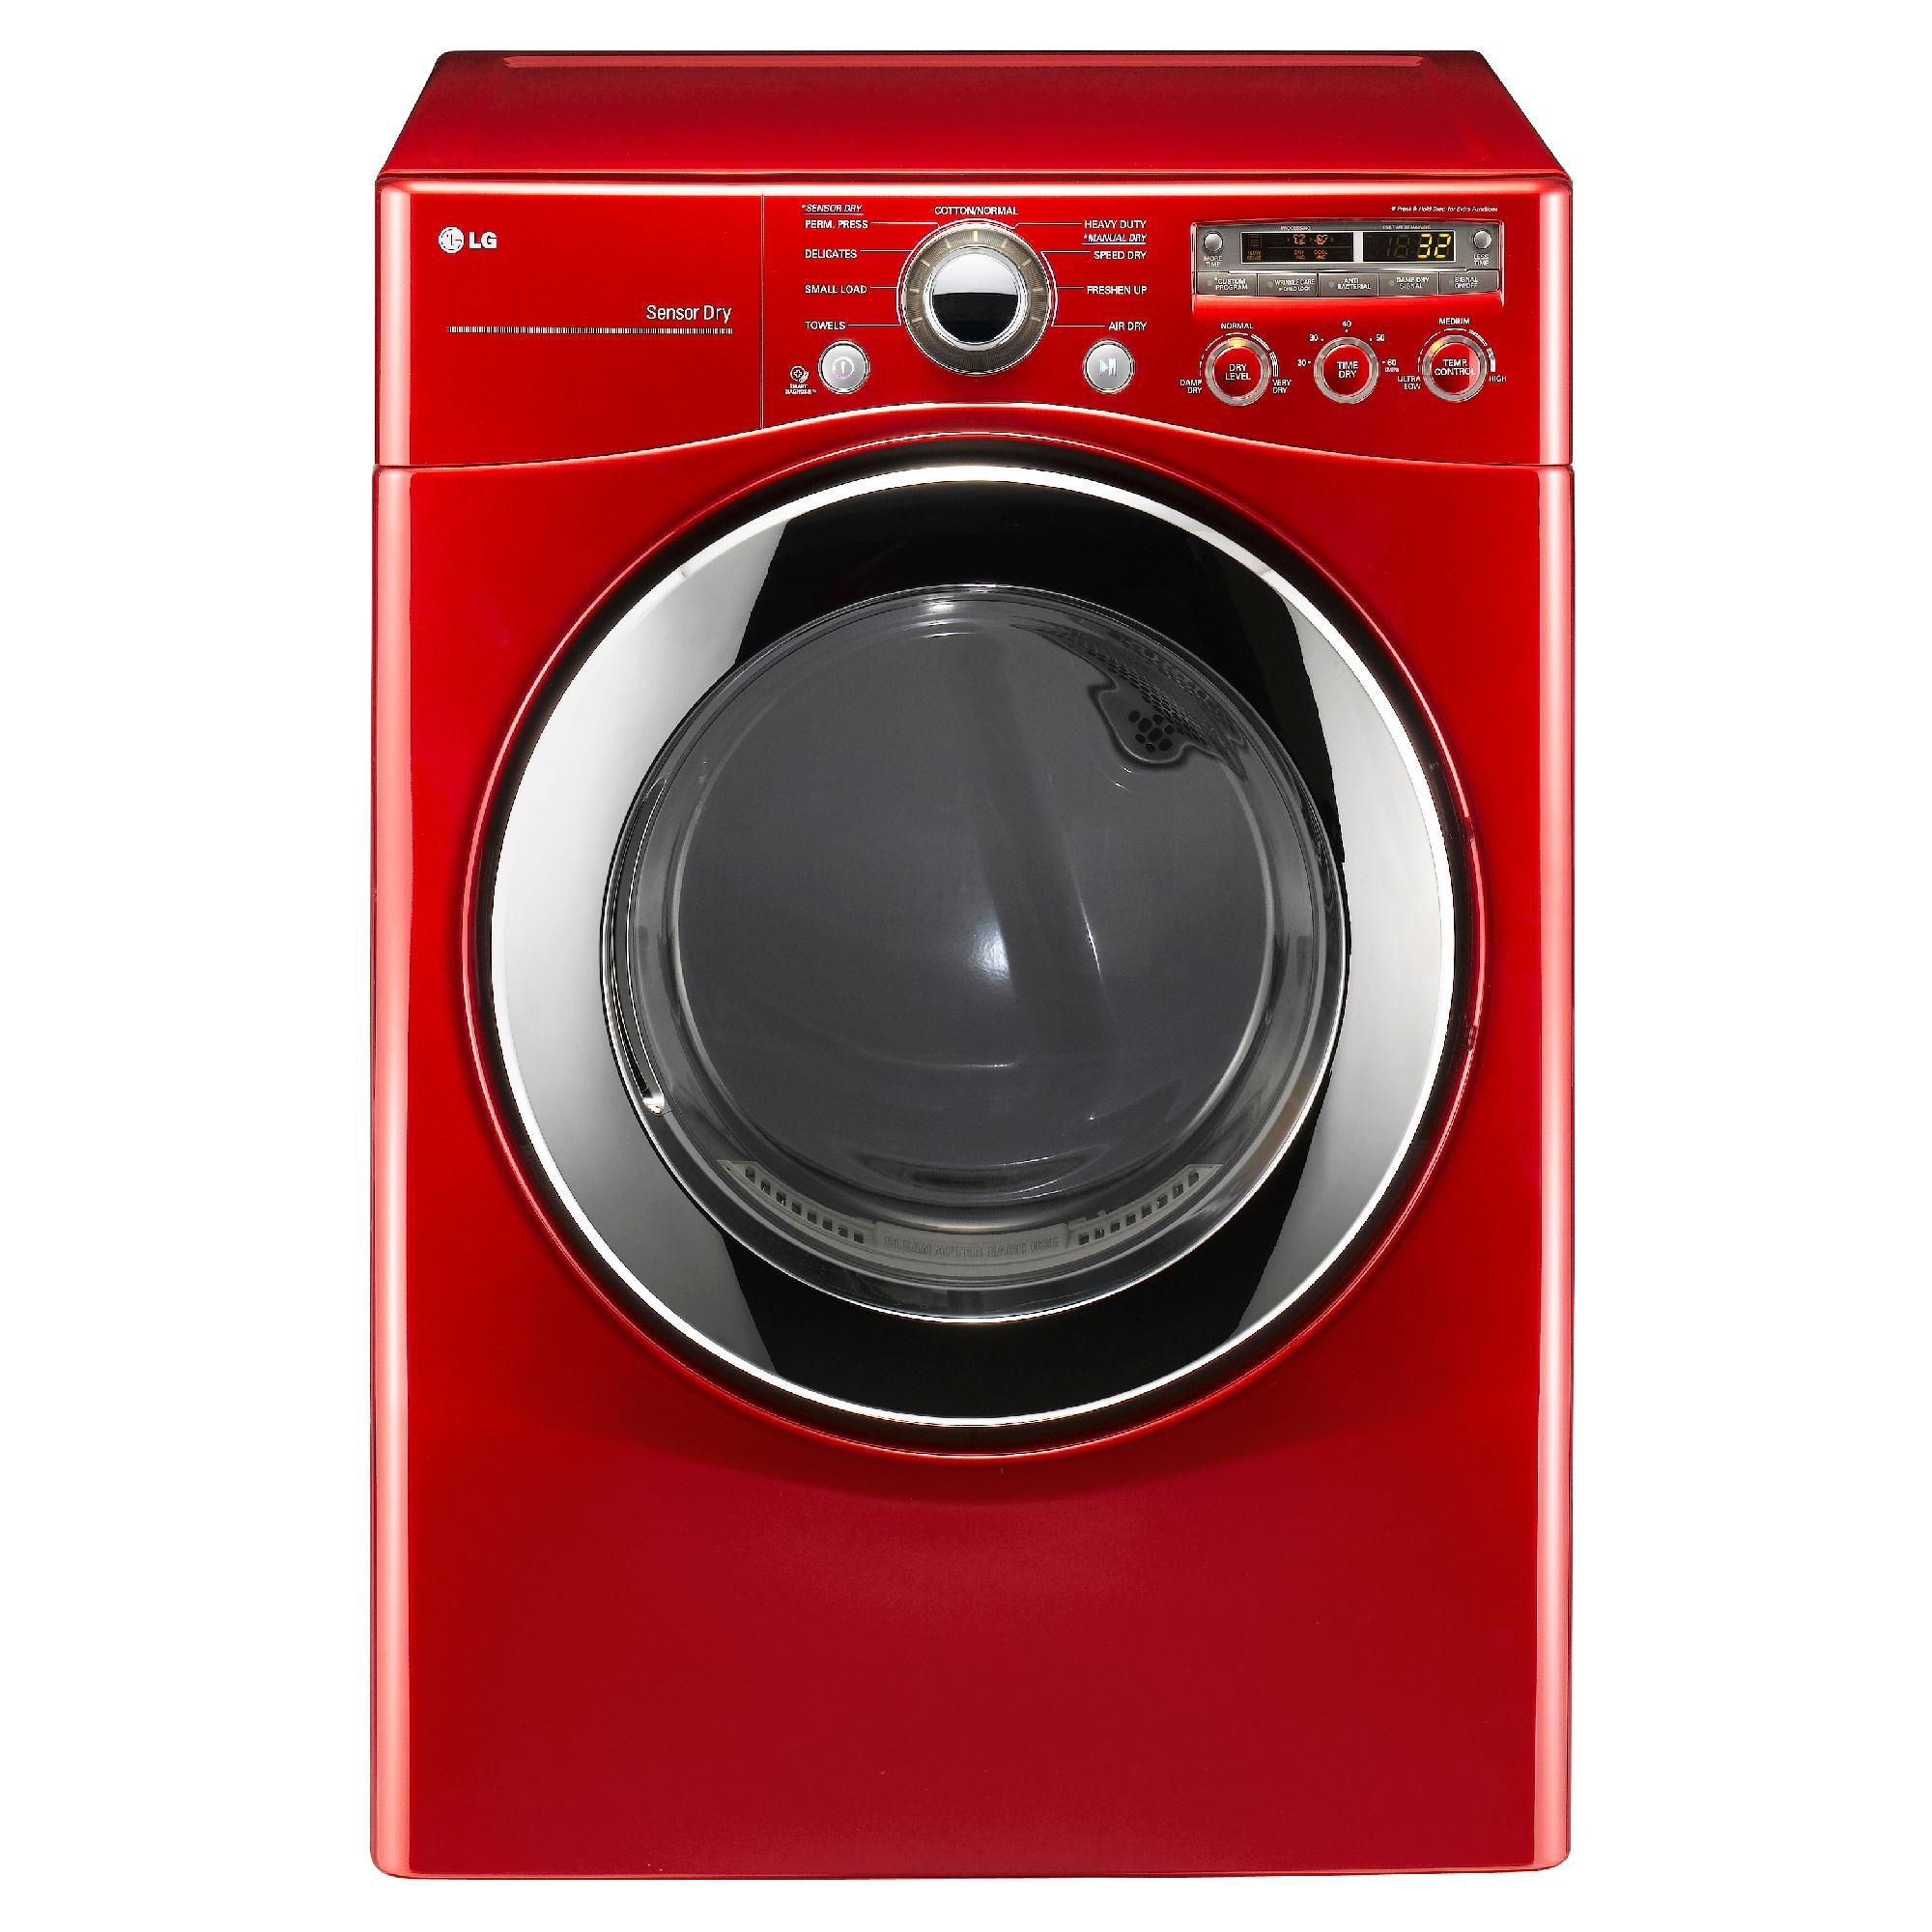 LG 7.3 cu. ft. Electric Dryer - Red